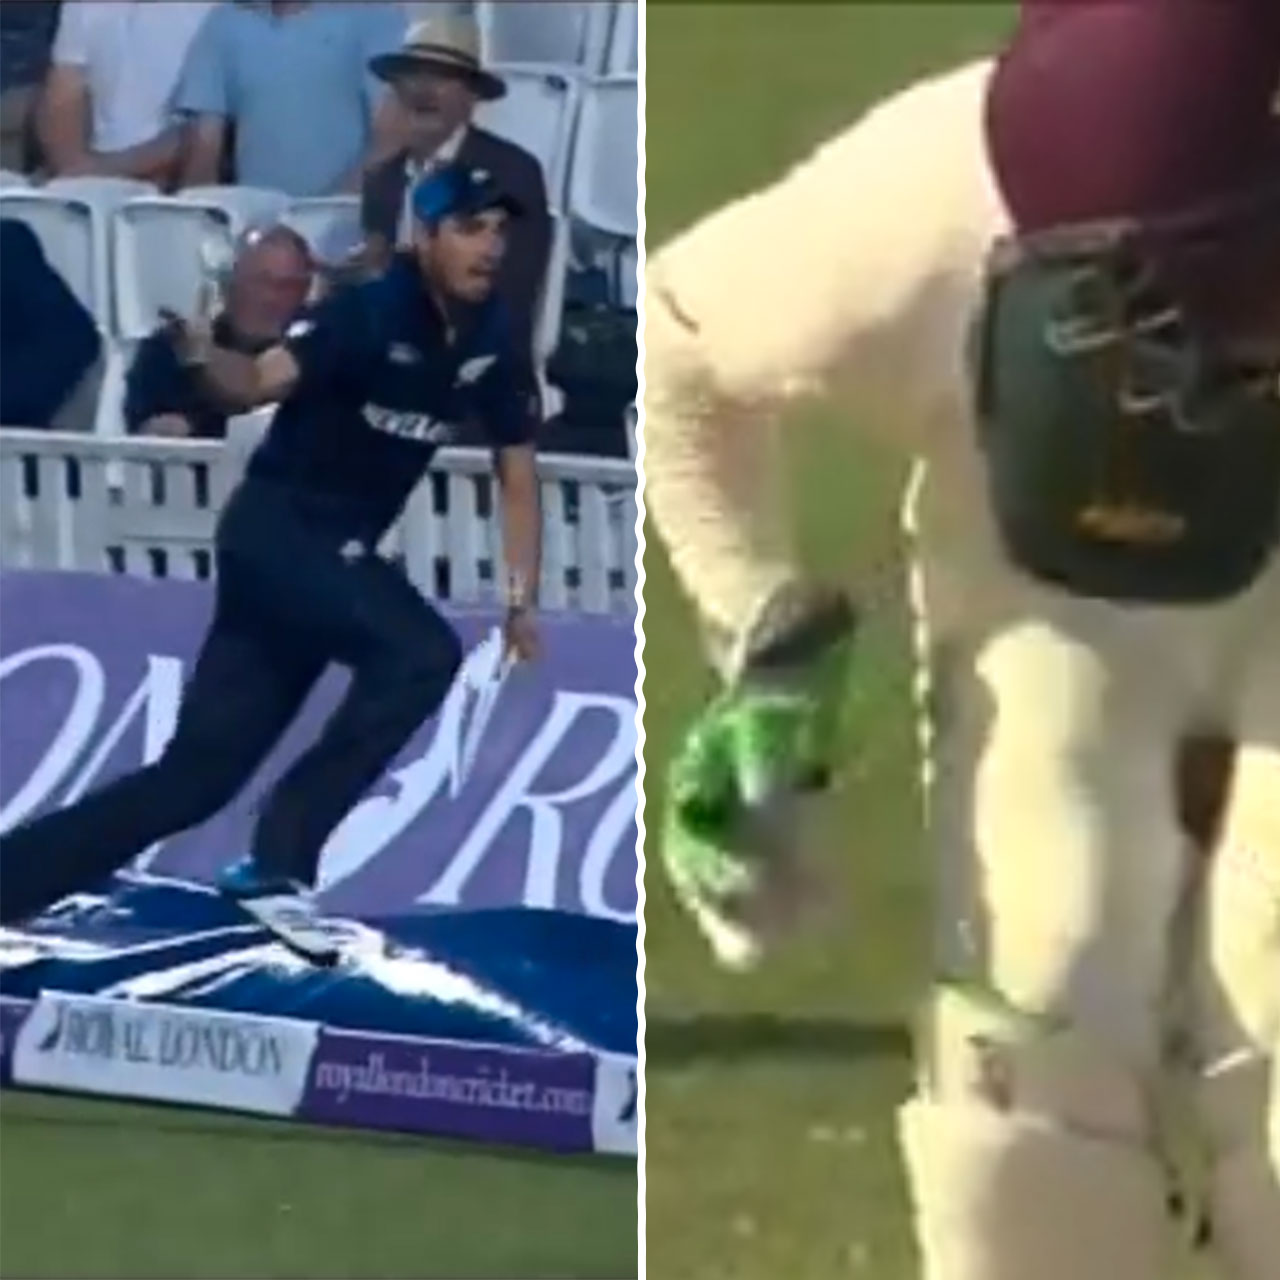 Tim Southee's sixer nixer and Brad Haddin's crotch catch make for amazing cricket